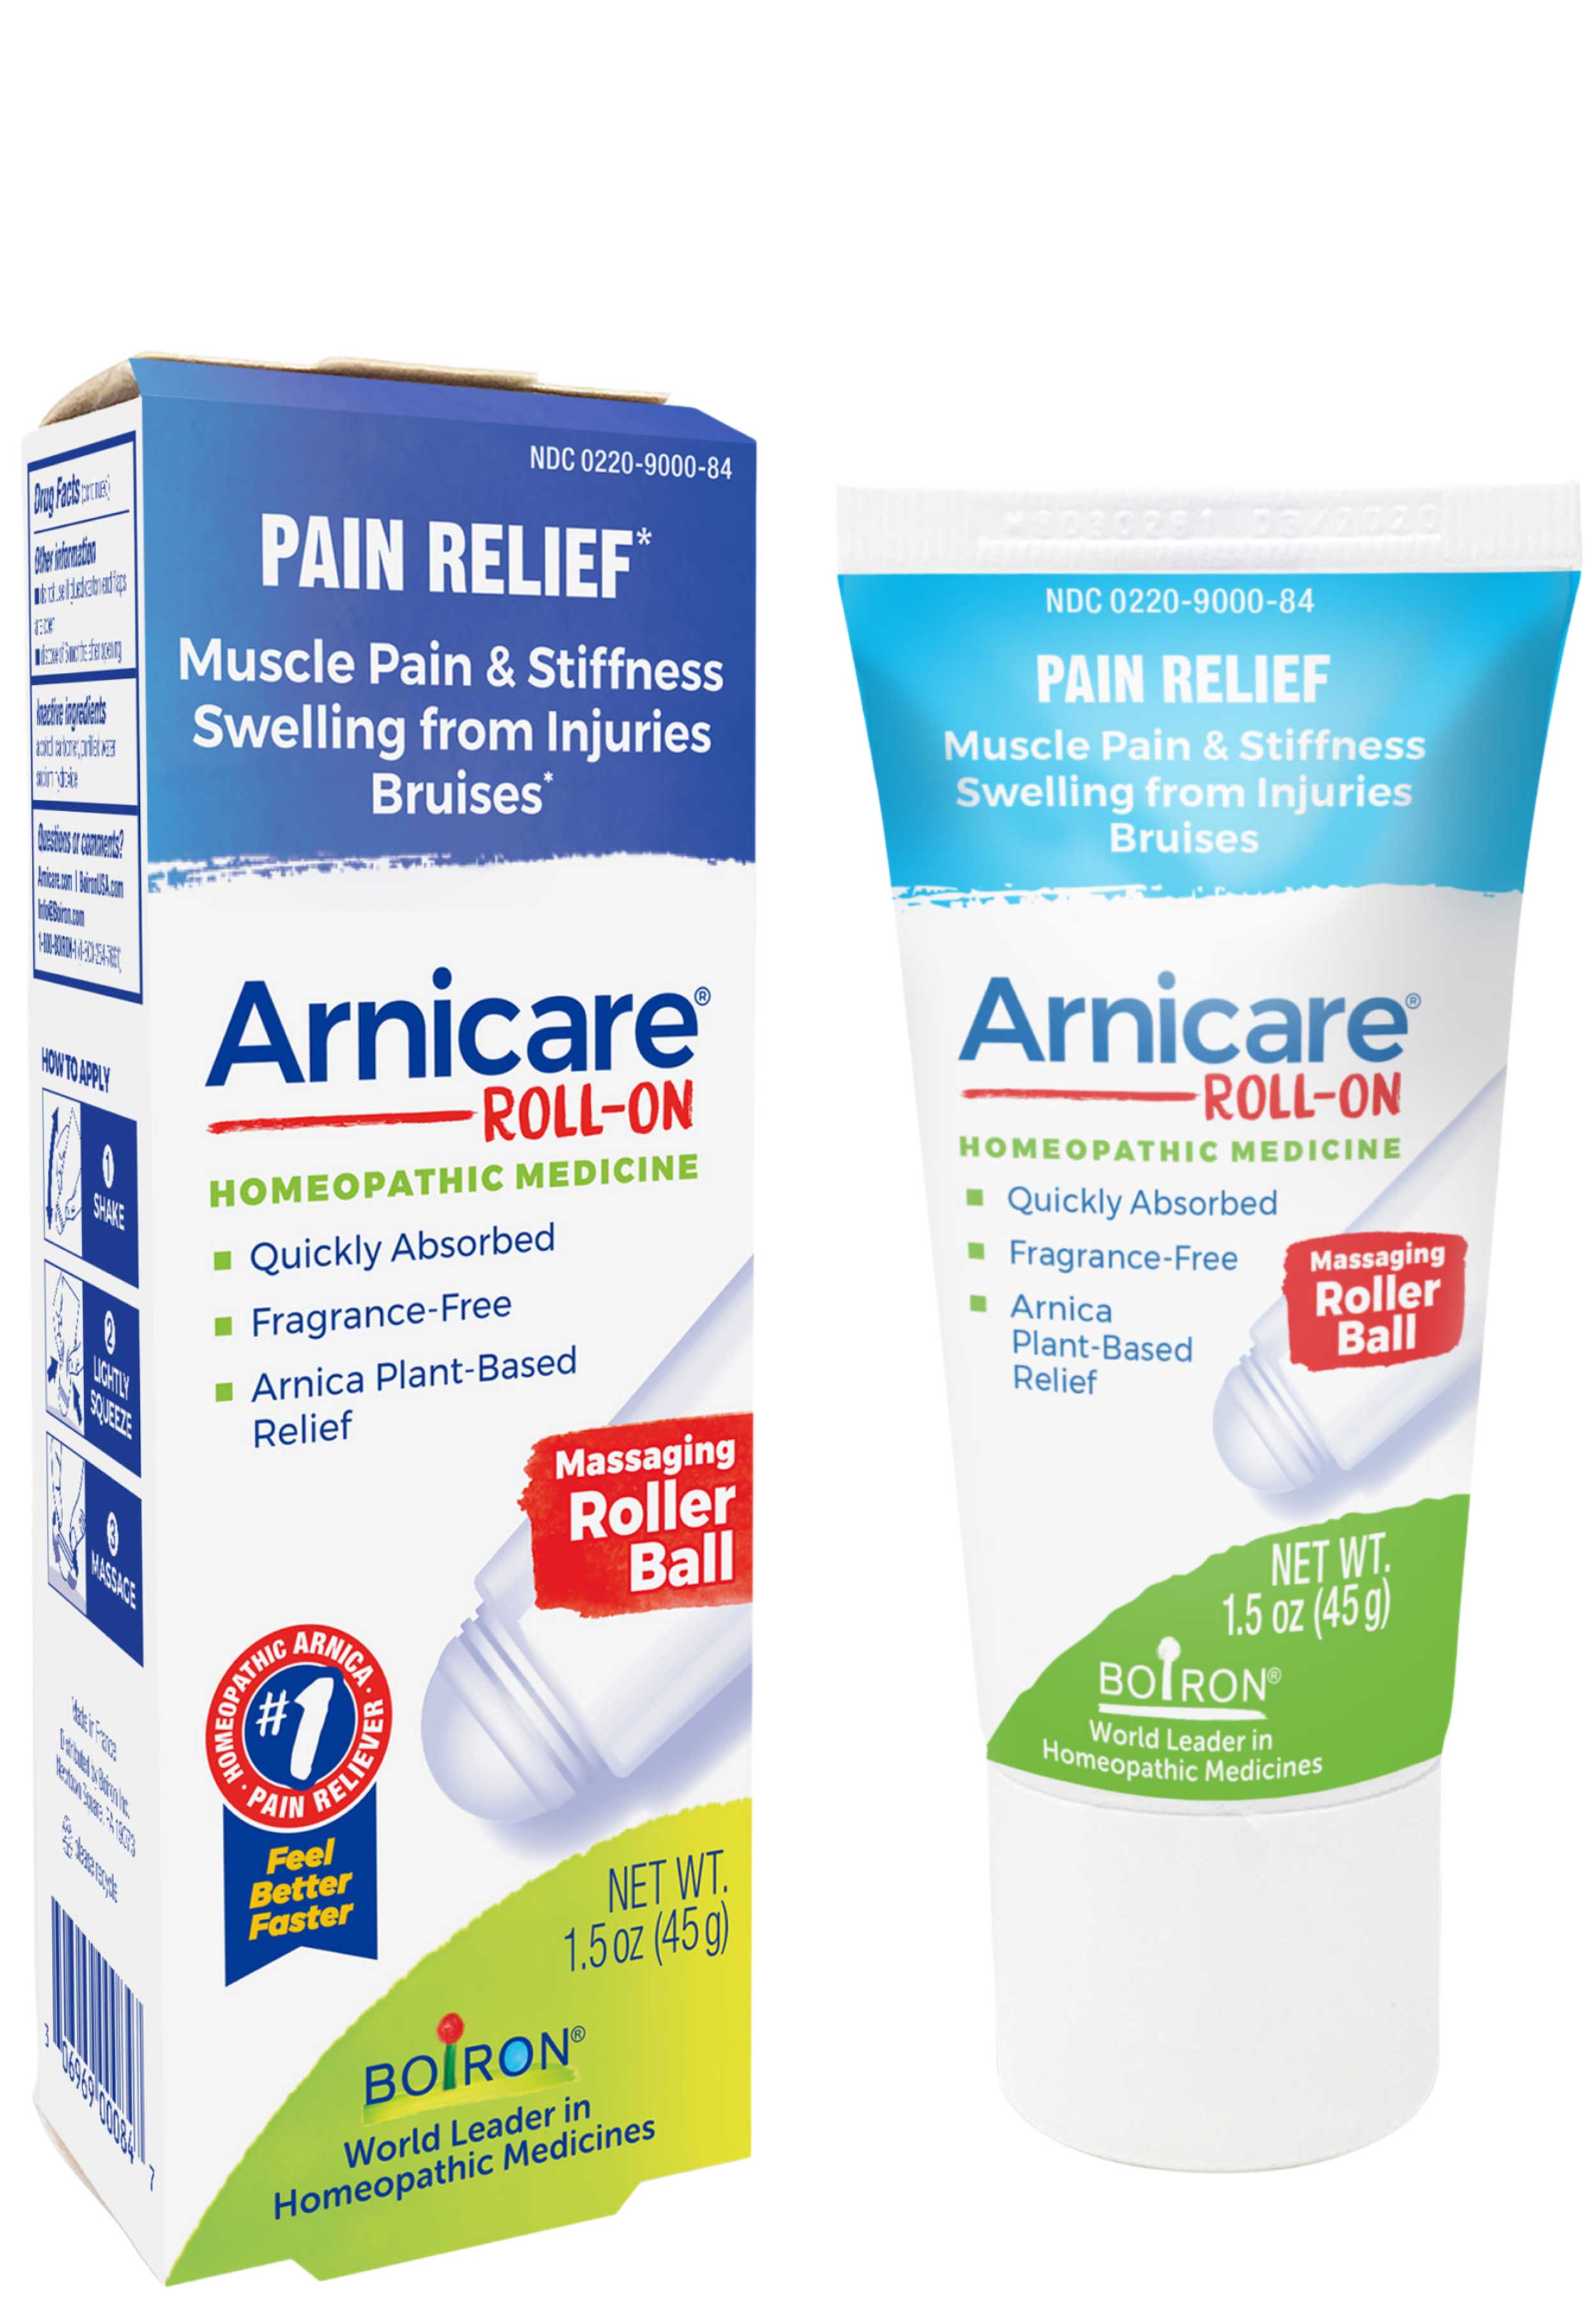 Boiron Homeopathics Arnicare Roll-On